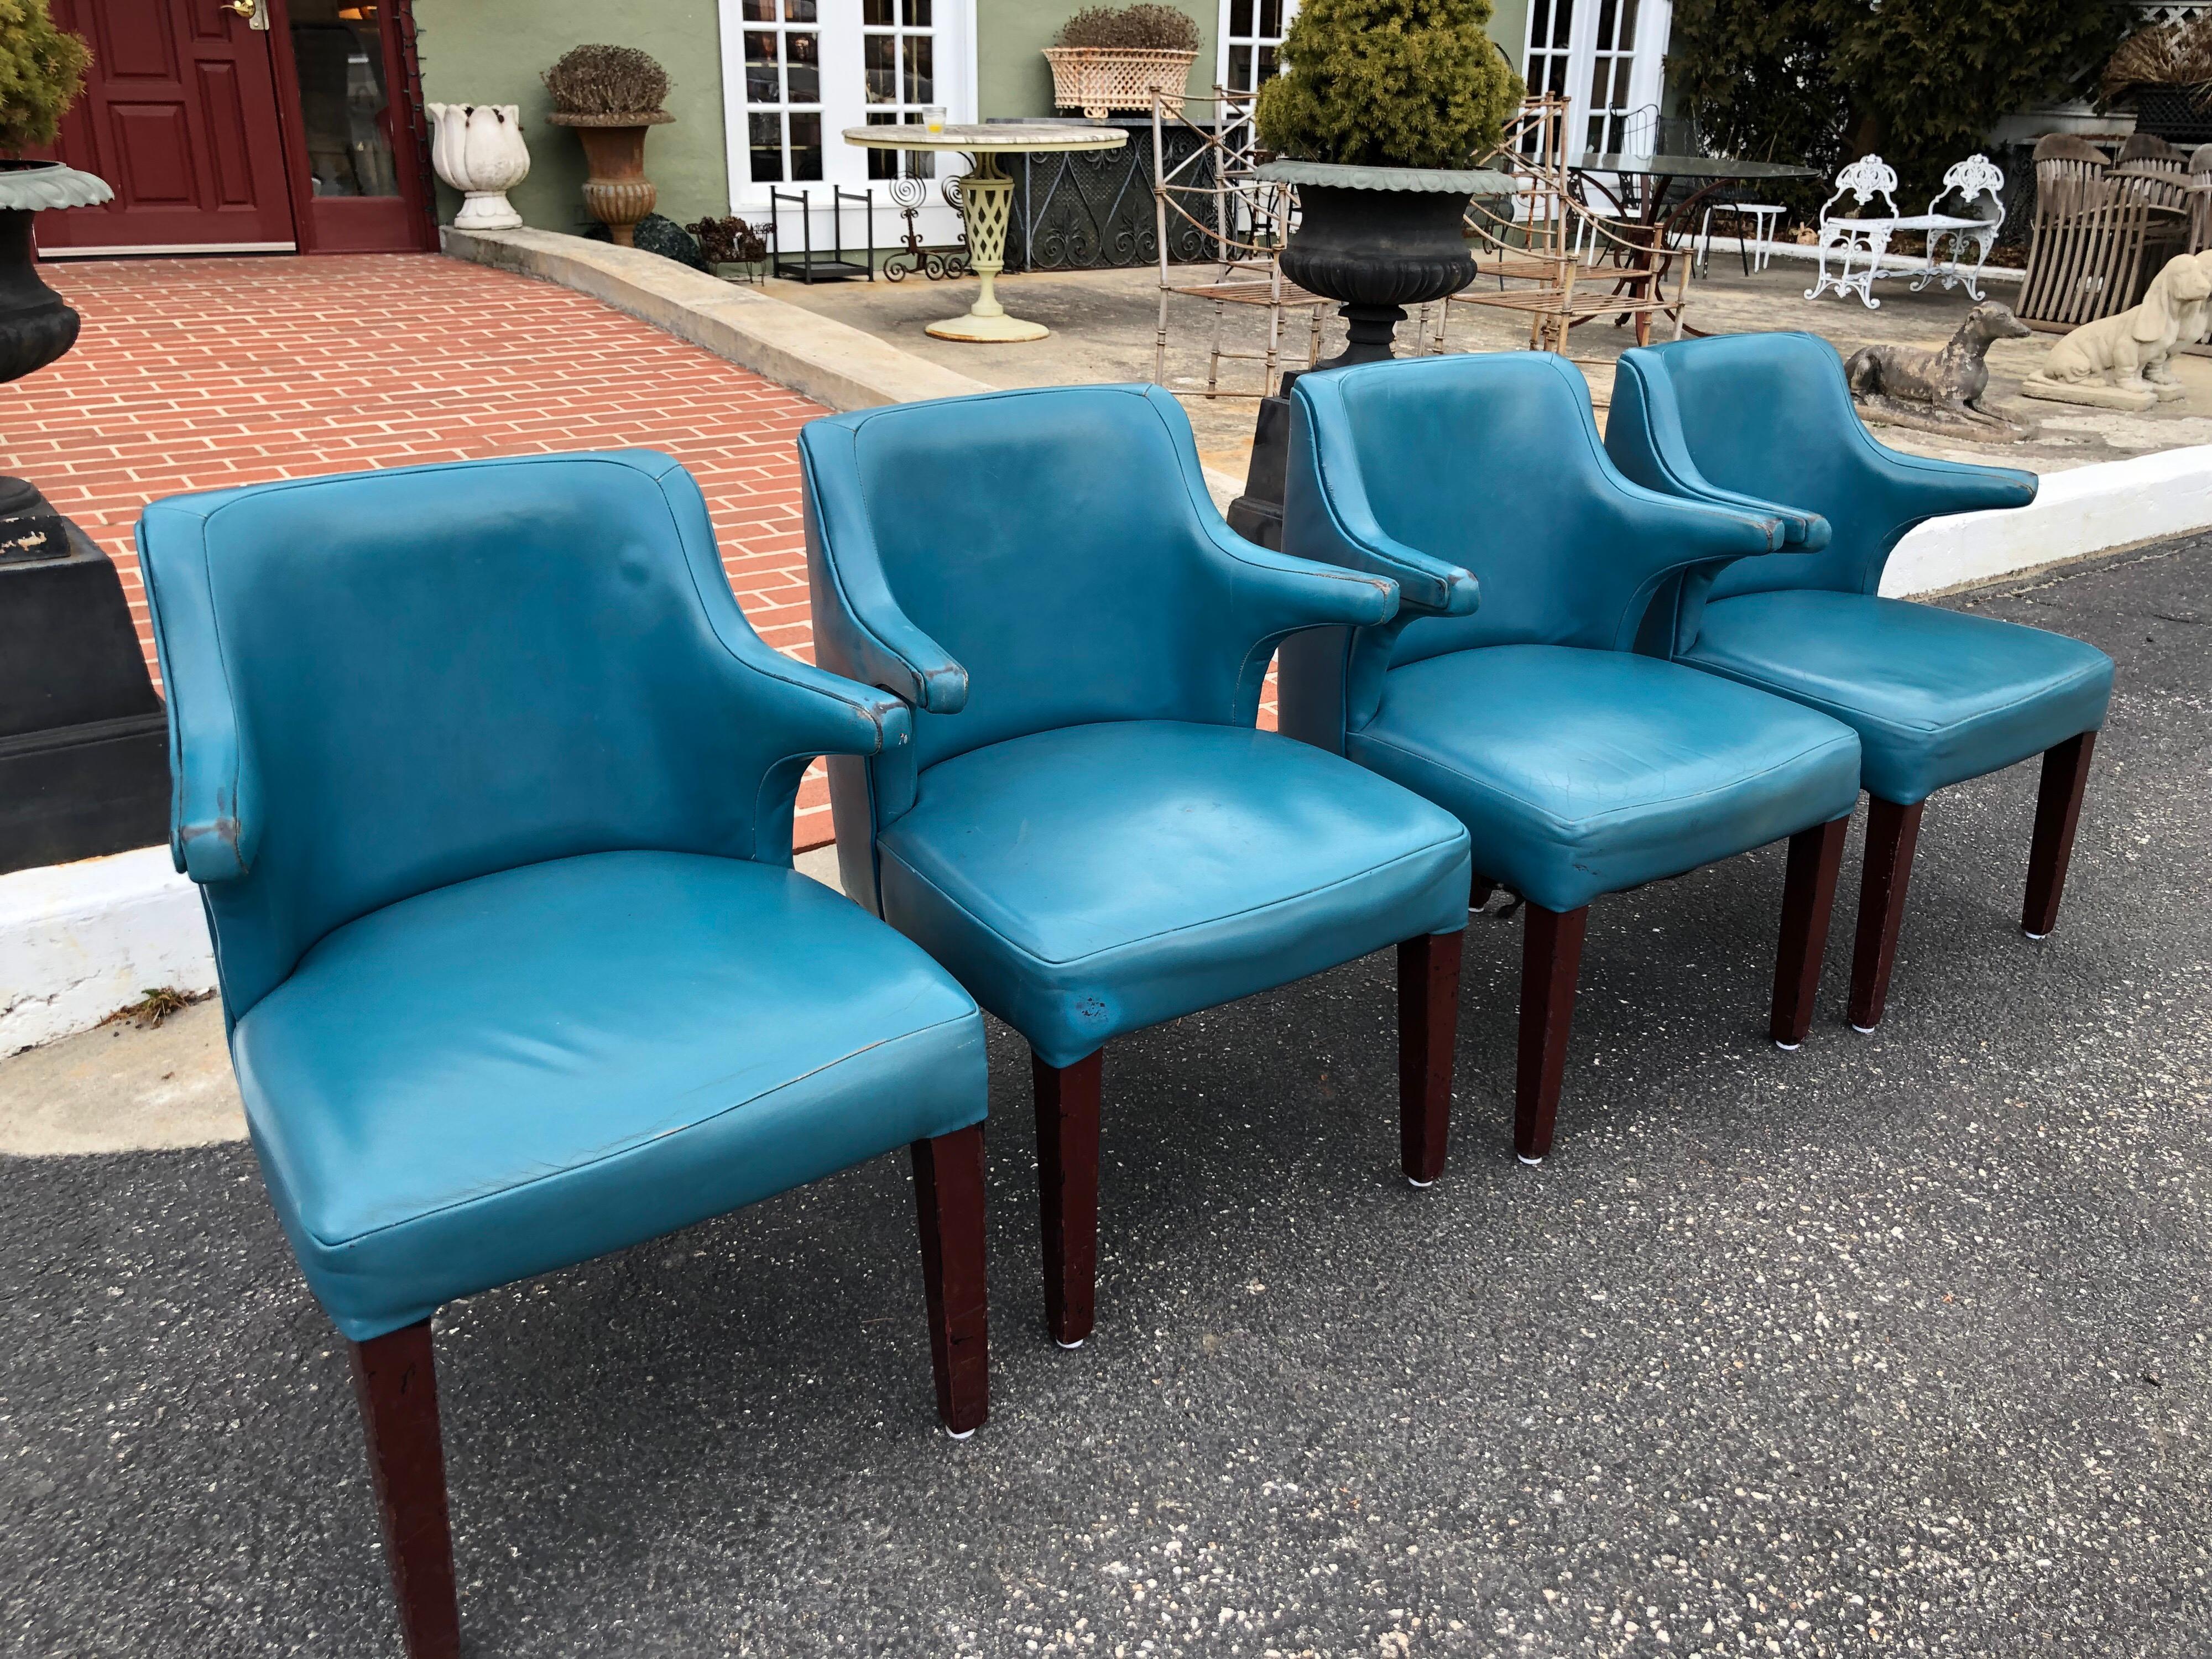 PVC Set of Four Mid-Century Modern Chairs in Peacock Blue